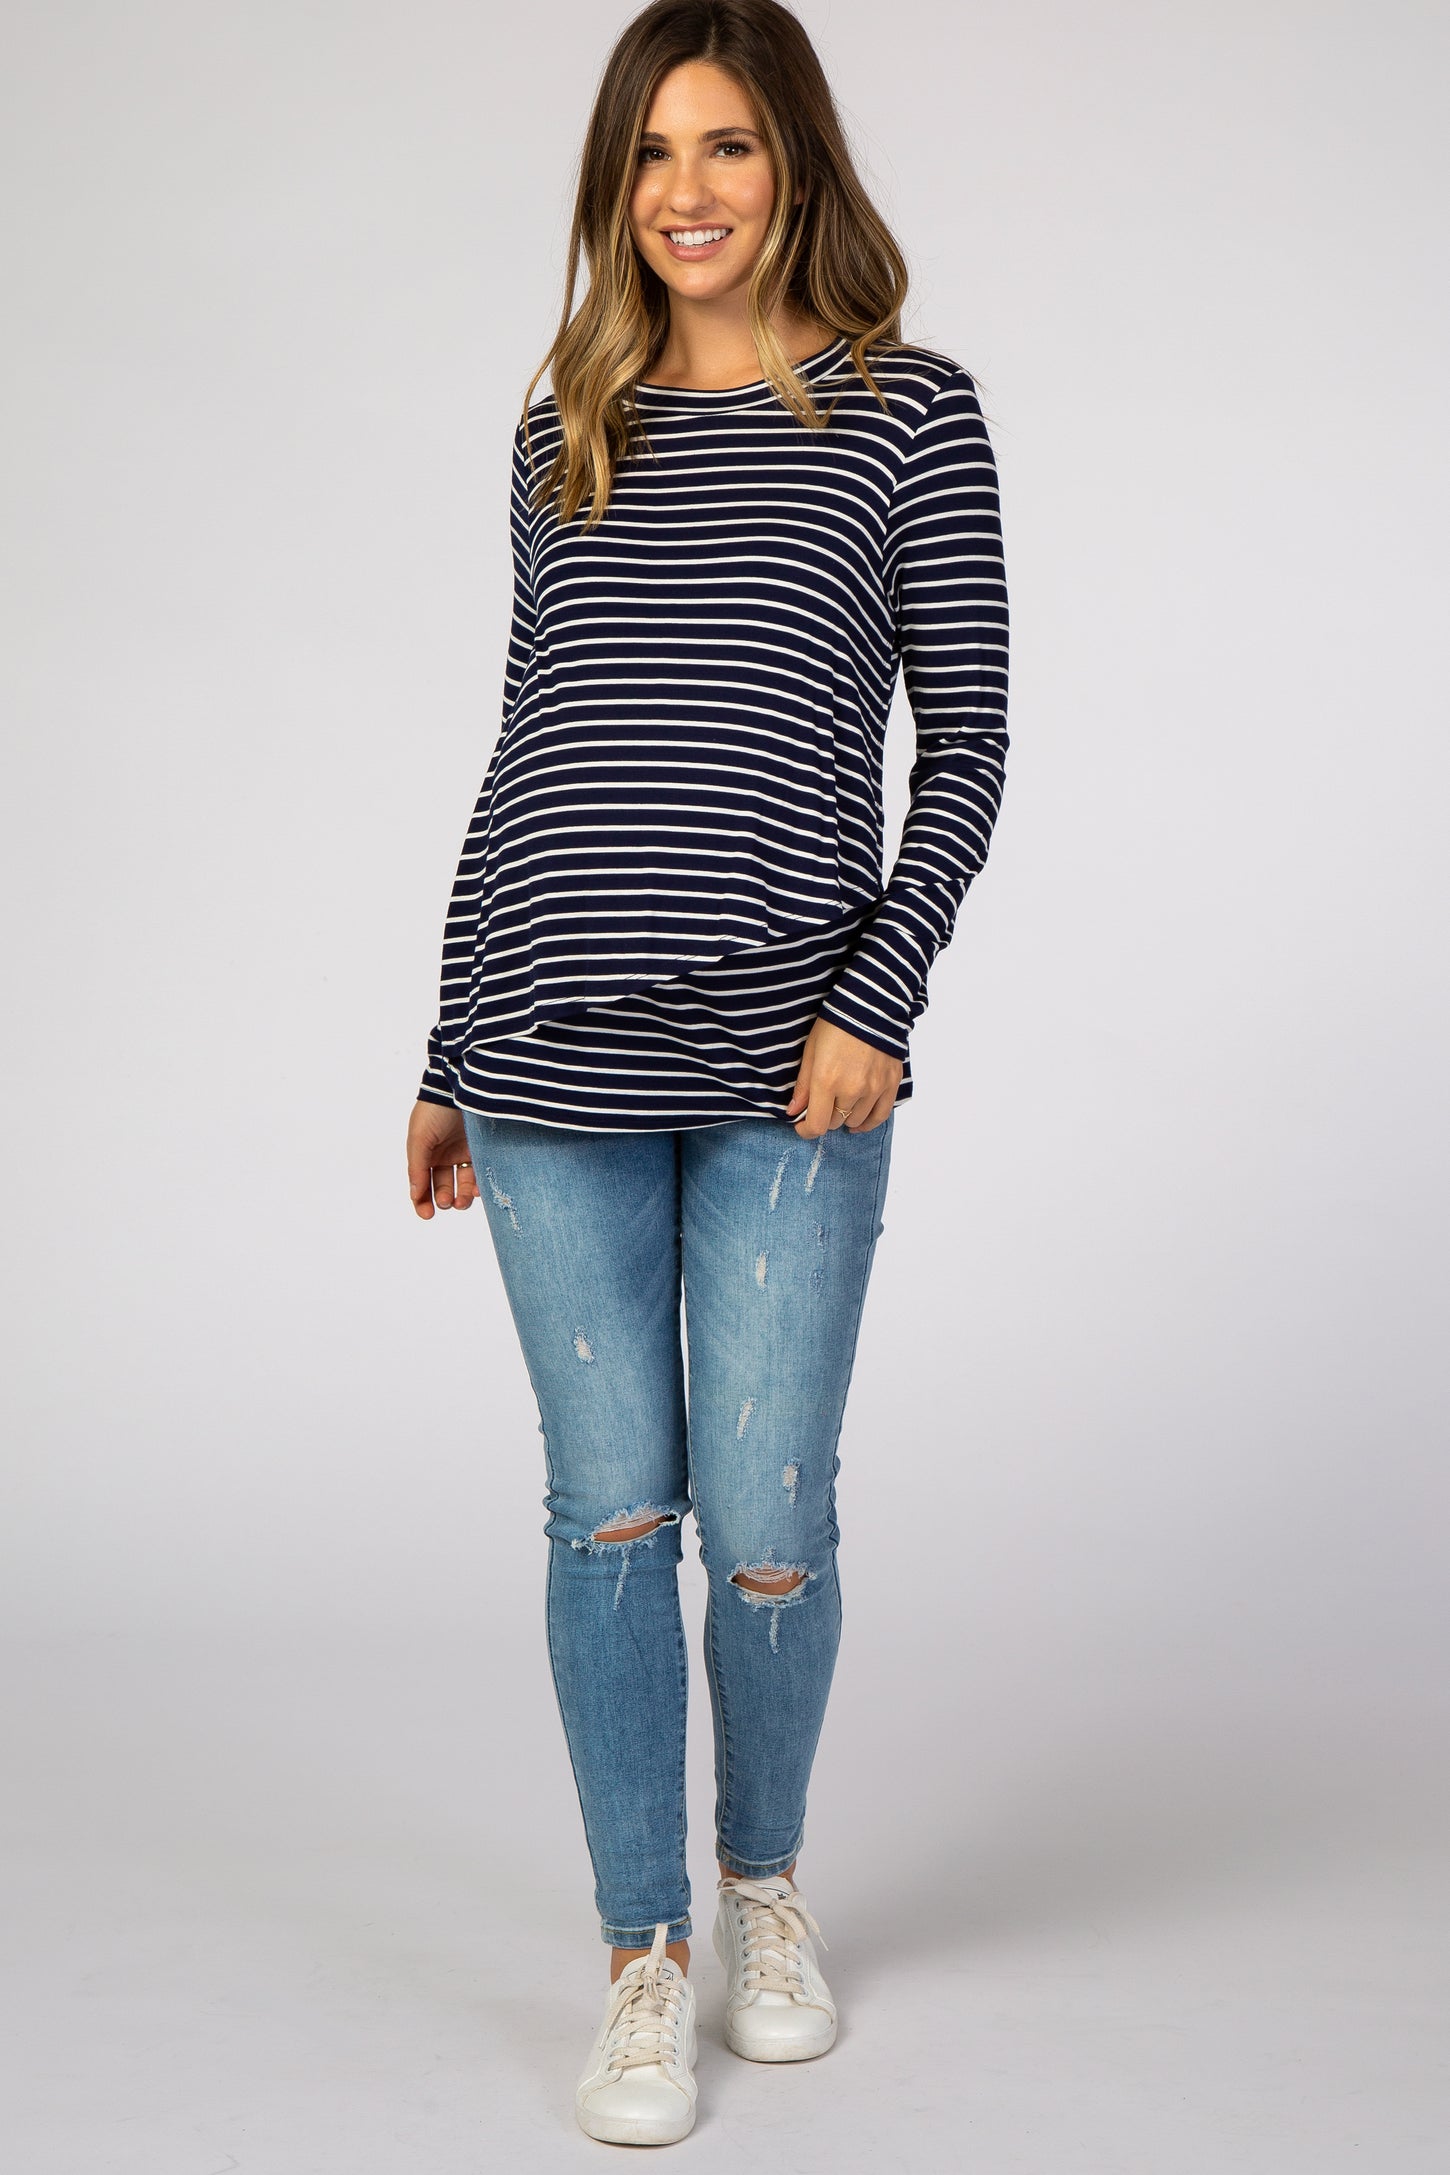 Navy Blue Striped Layered Front Long Sleeve Maternity/Nursing Top ...